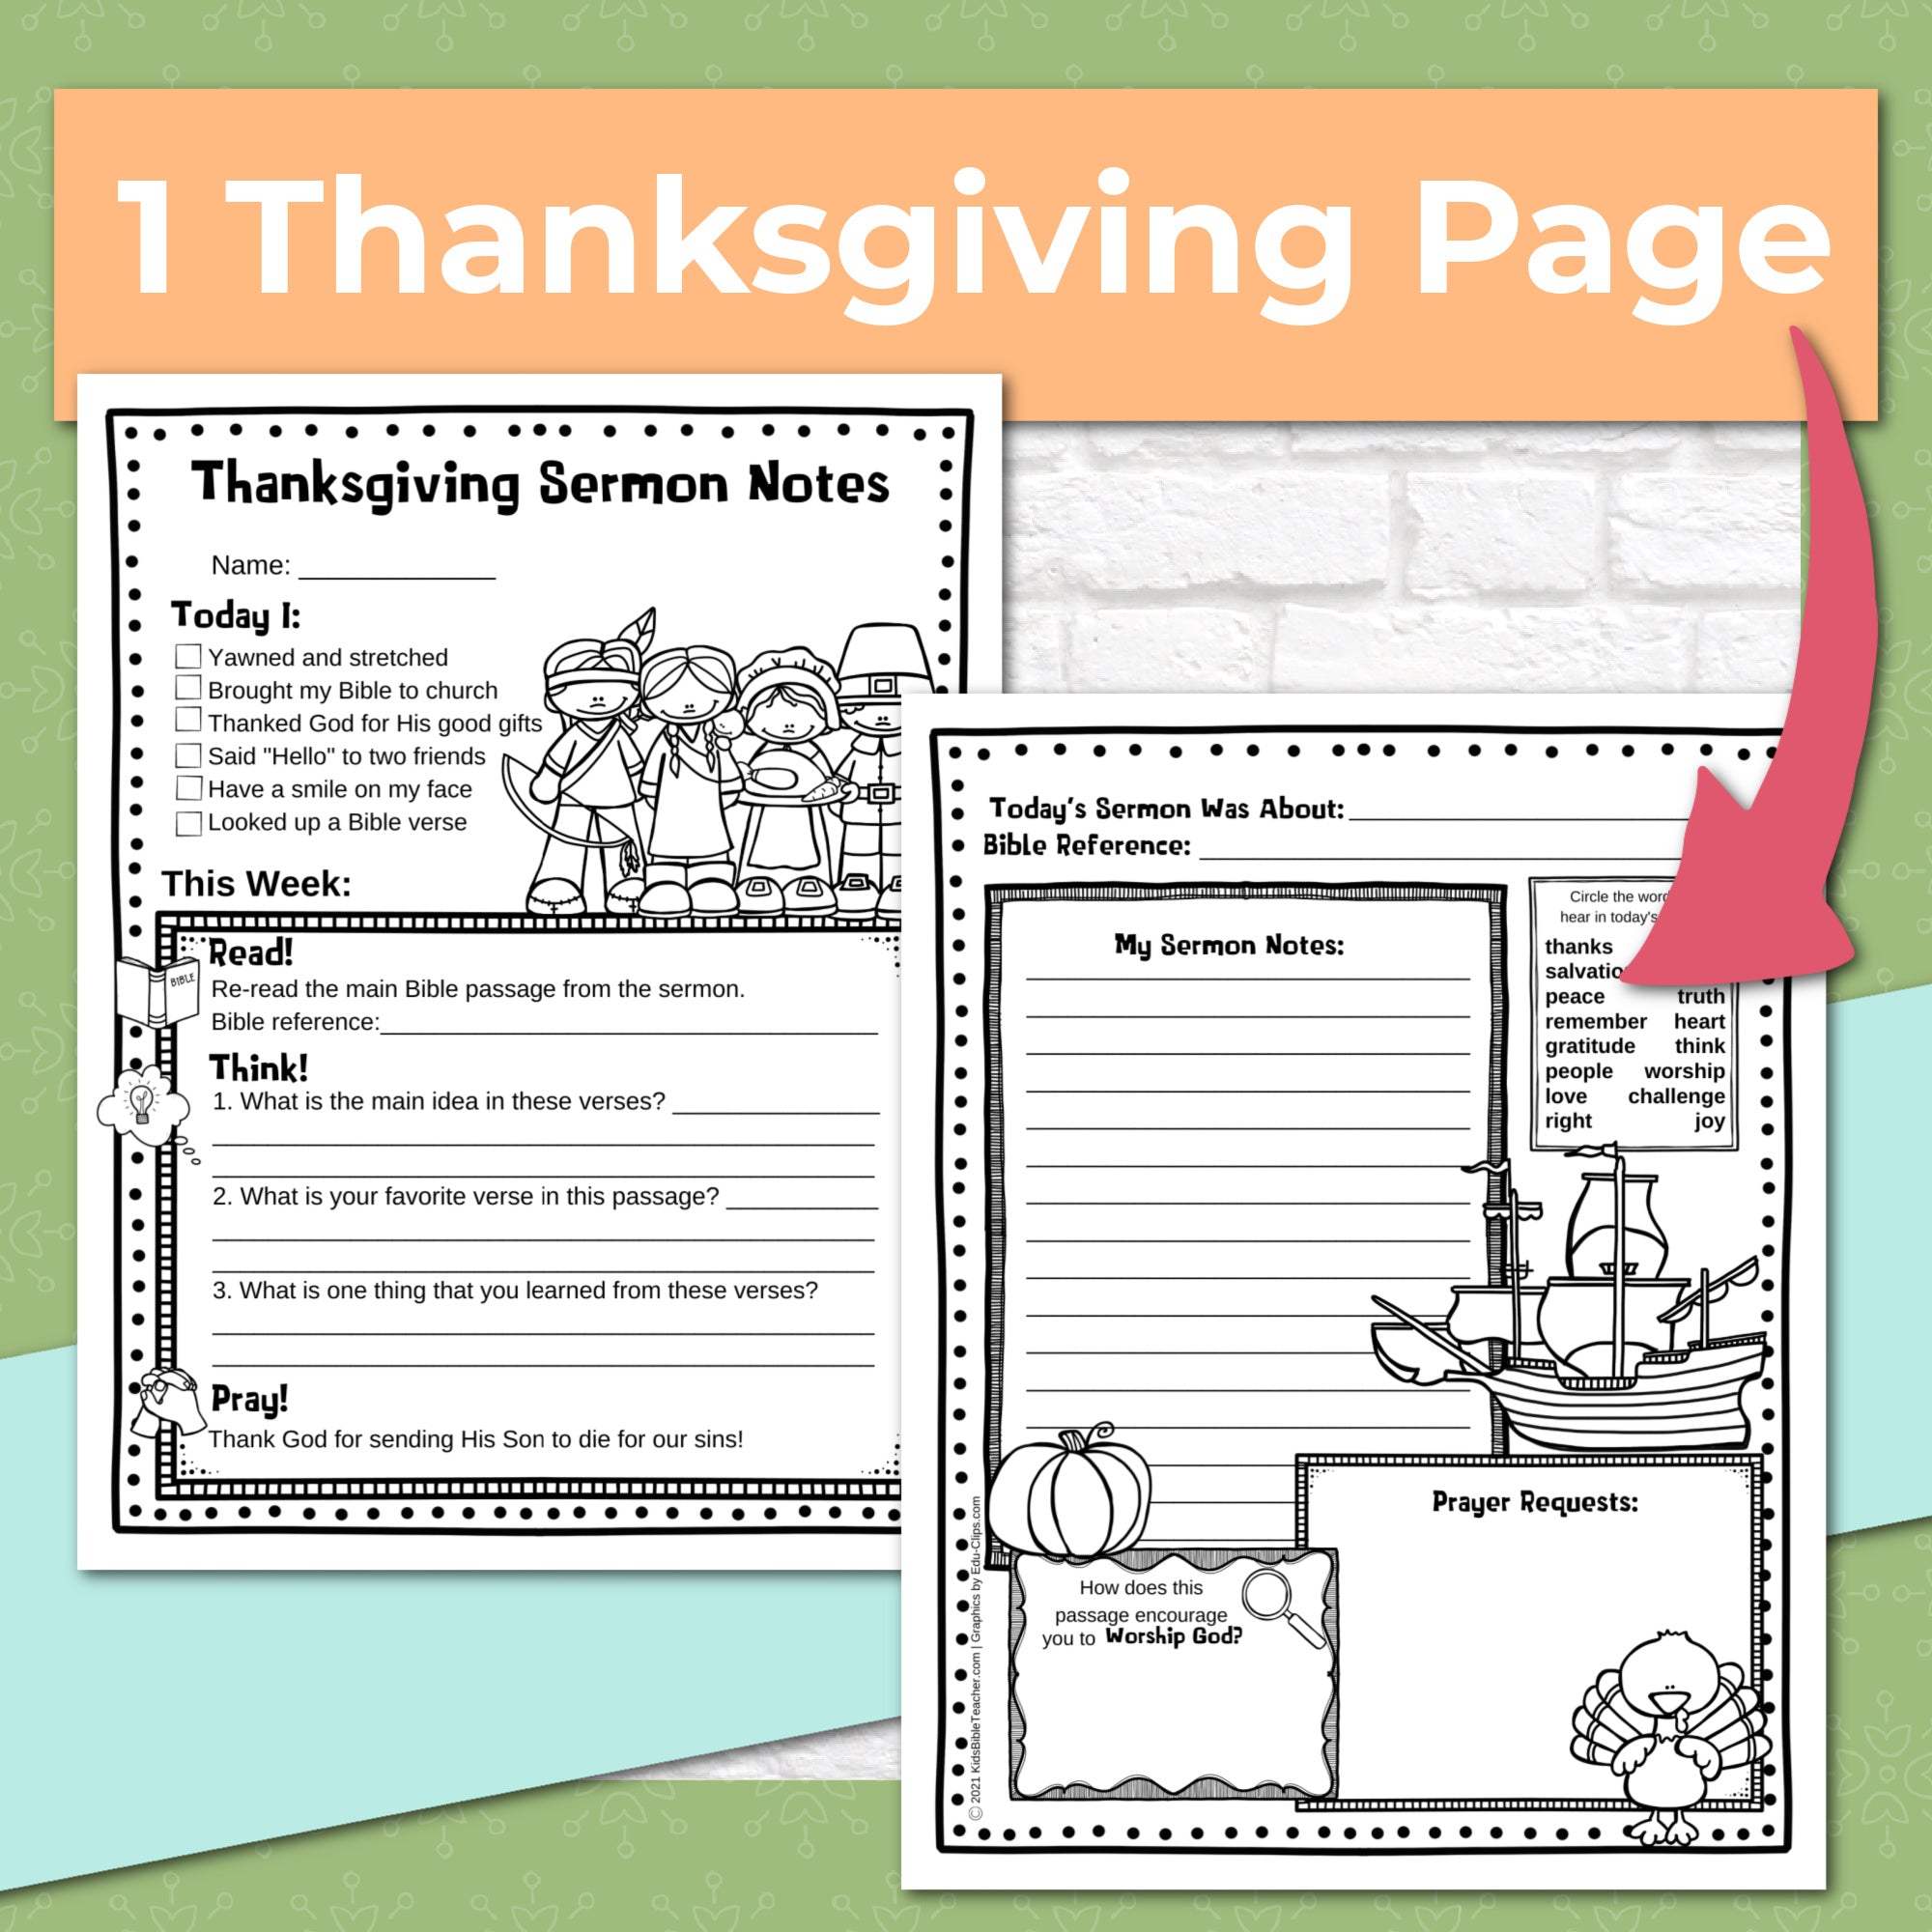 Seasonal and Holidays Sermon Notes Pack for Kids, Instant DIGITAL DOWNLOAD